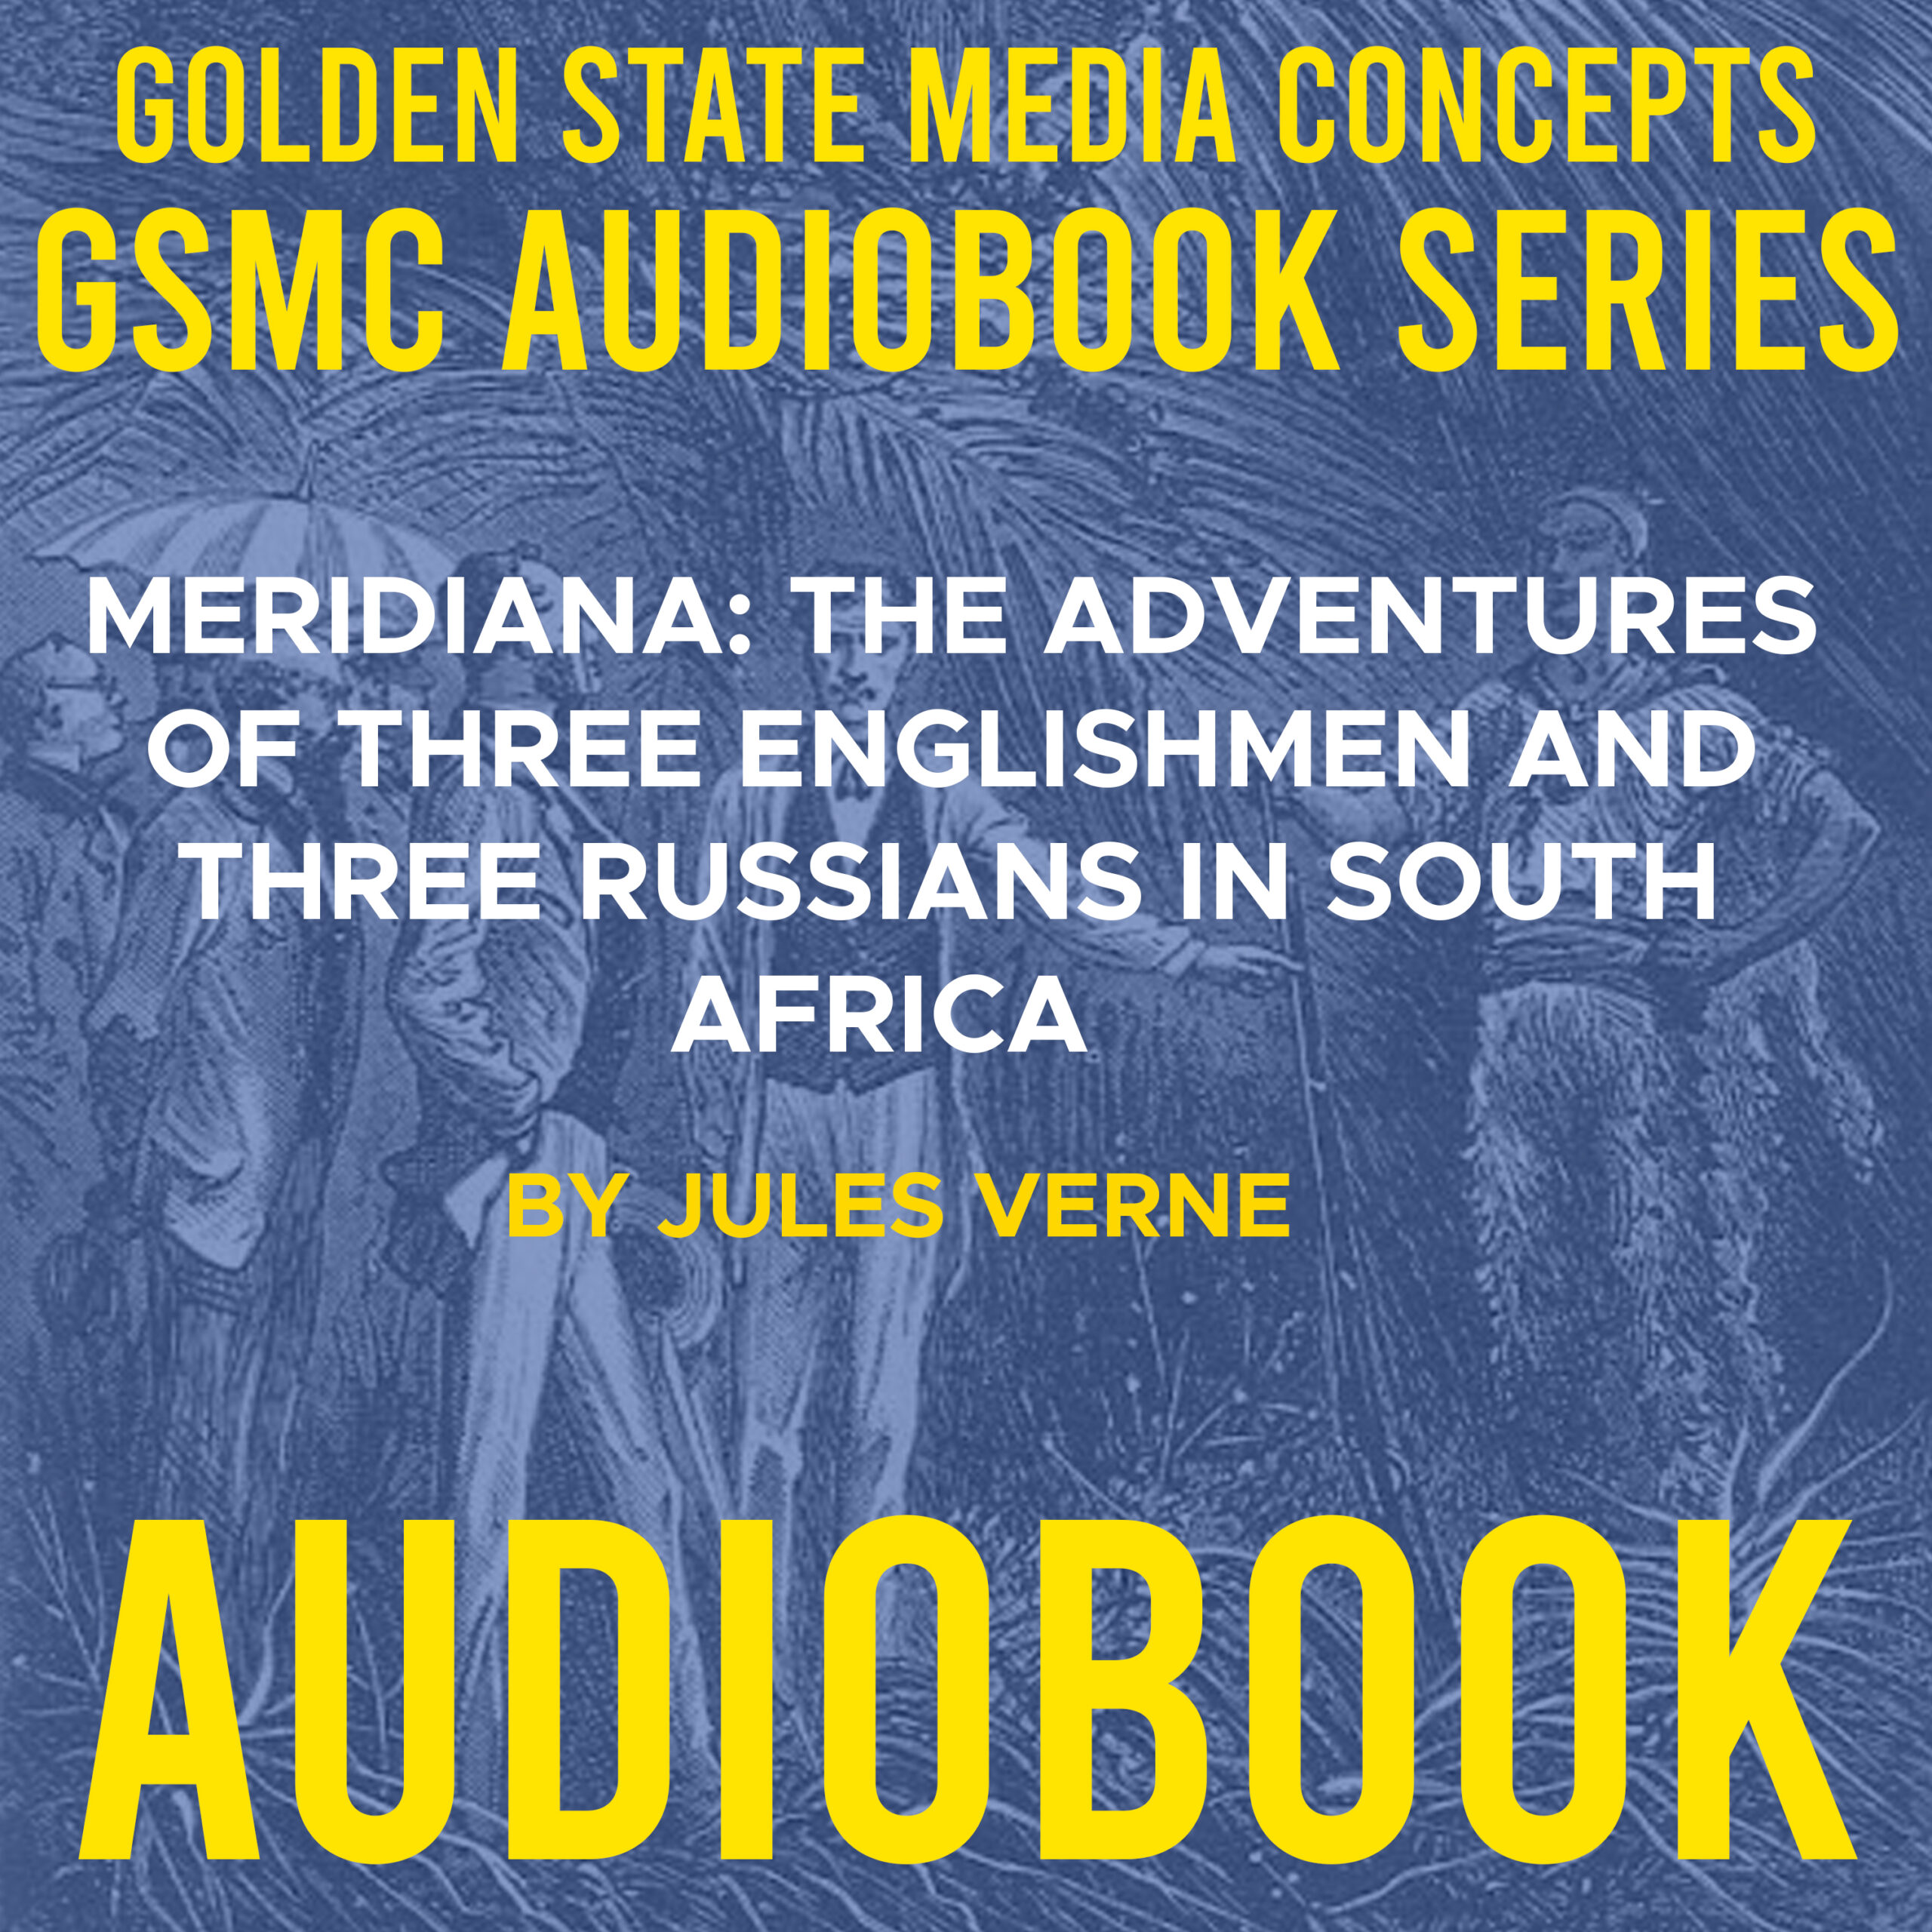 GSMC Audiobook Series: Meridiana: The Adventures of Three Englishmen and Three Russians in South Africa